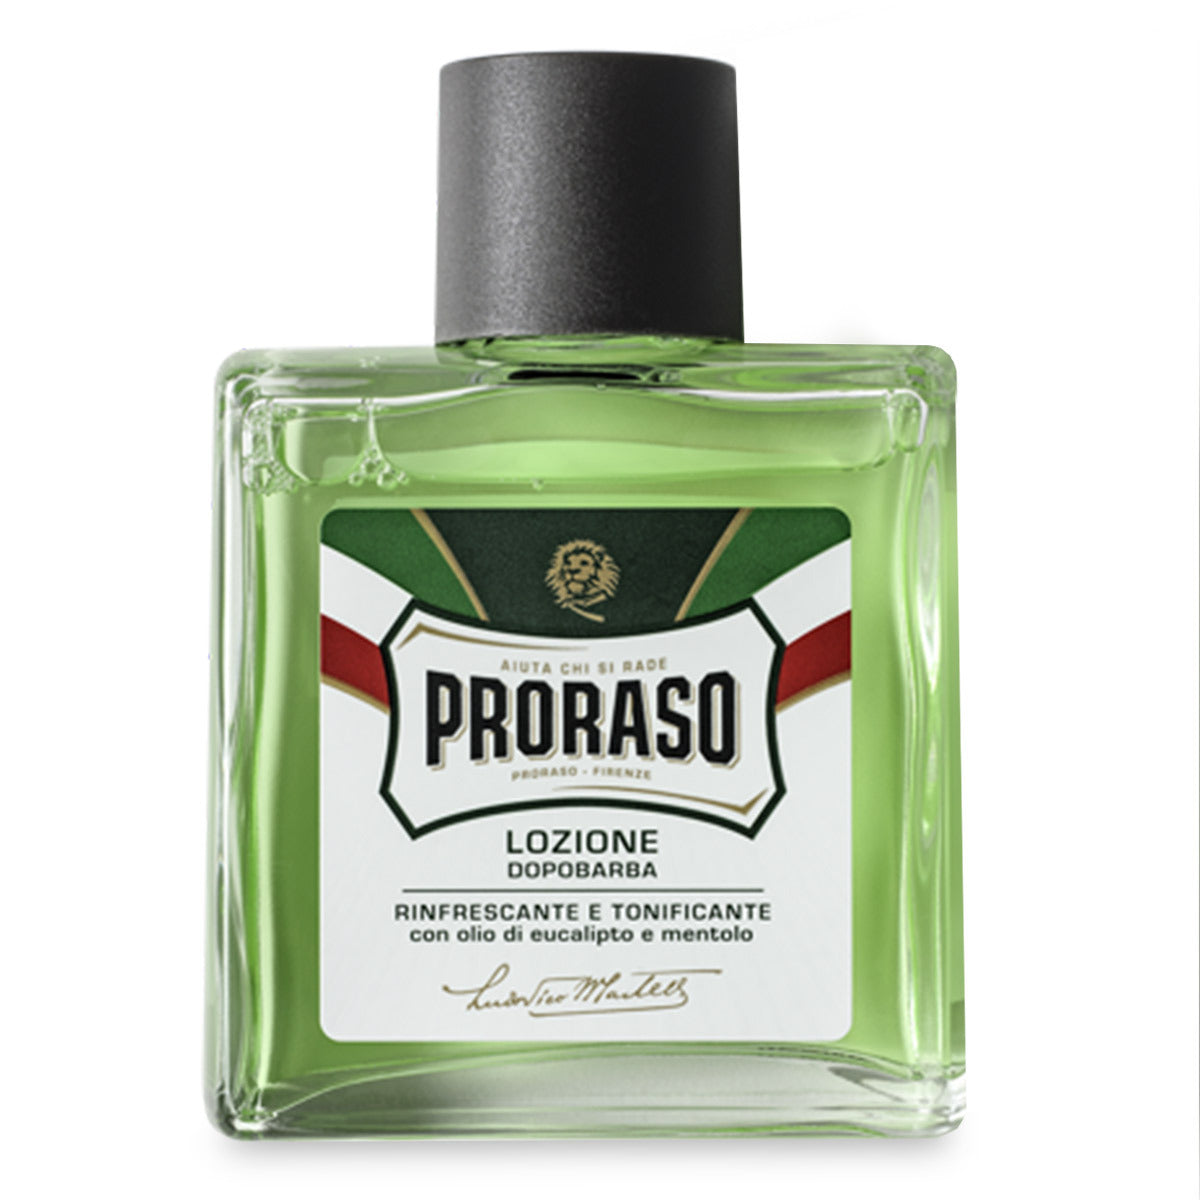 Primary image of Refresh After Shave Lotion